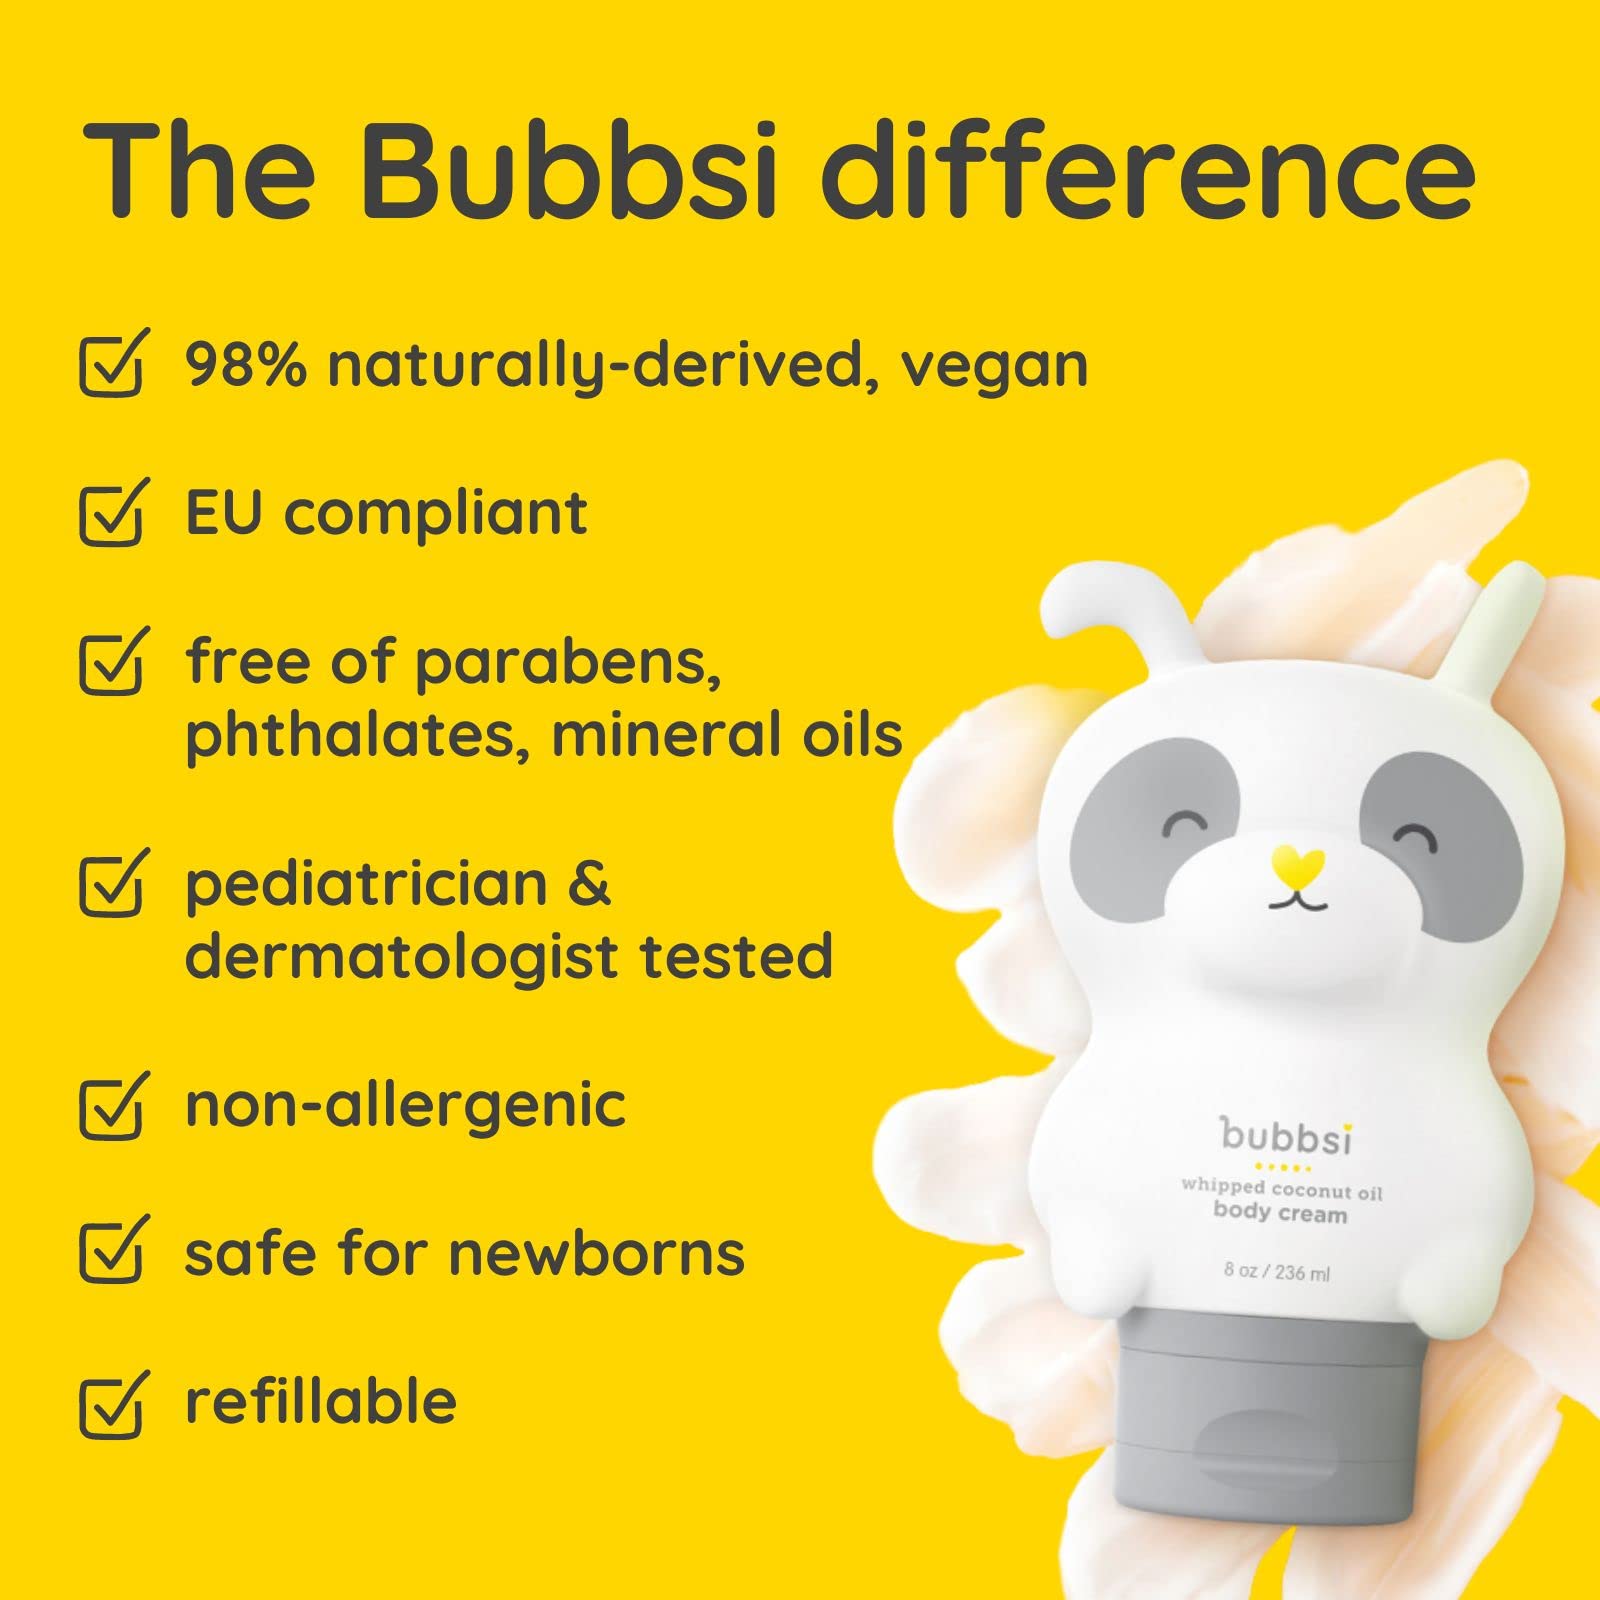 Bubbsi Whipped Coconut Oil Baby Lotion for Eczema, Dry Skin, Baby Acne, KP | Organic Coconut Oil, Shea Butter, Vitamin E | Light, Natural Scent | EU Compliant, Vegan (Refillable, 8oz)